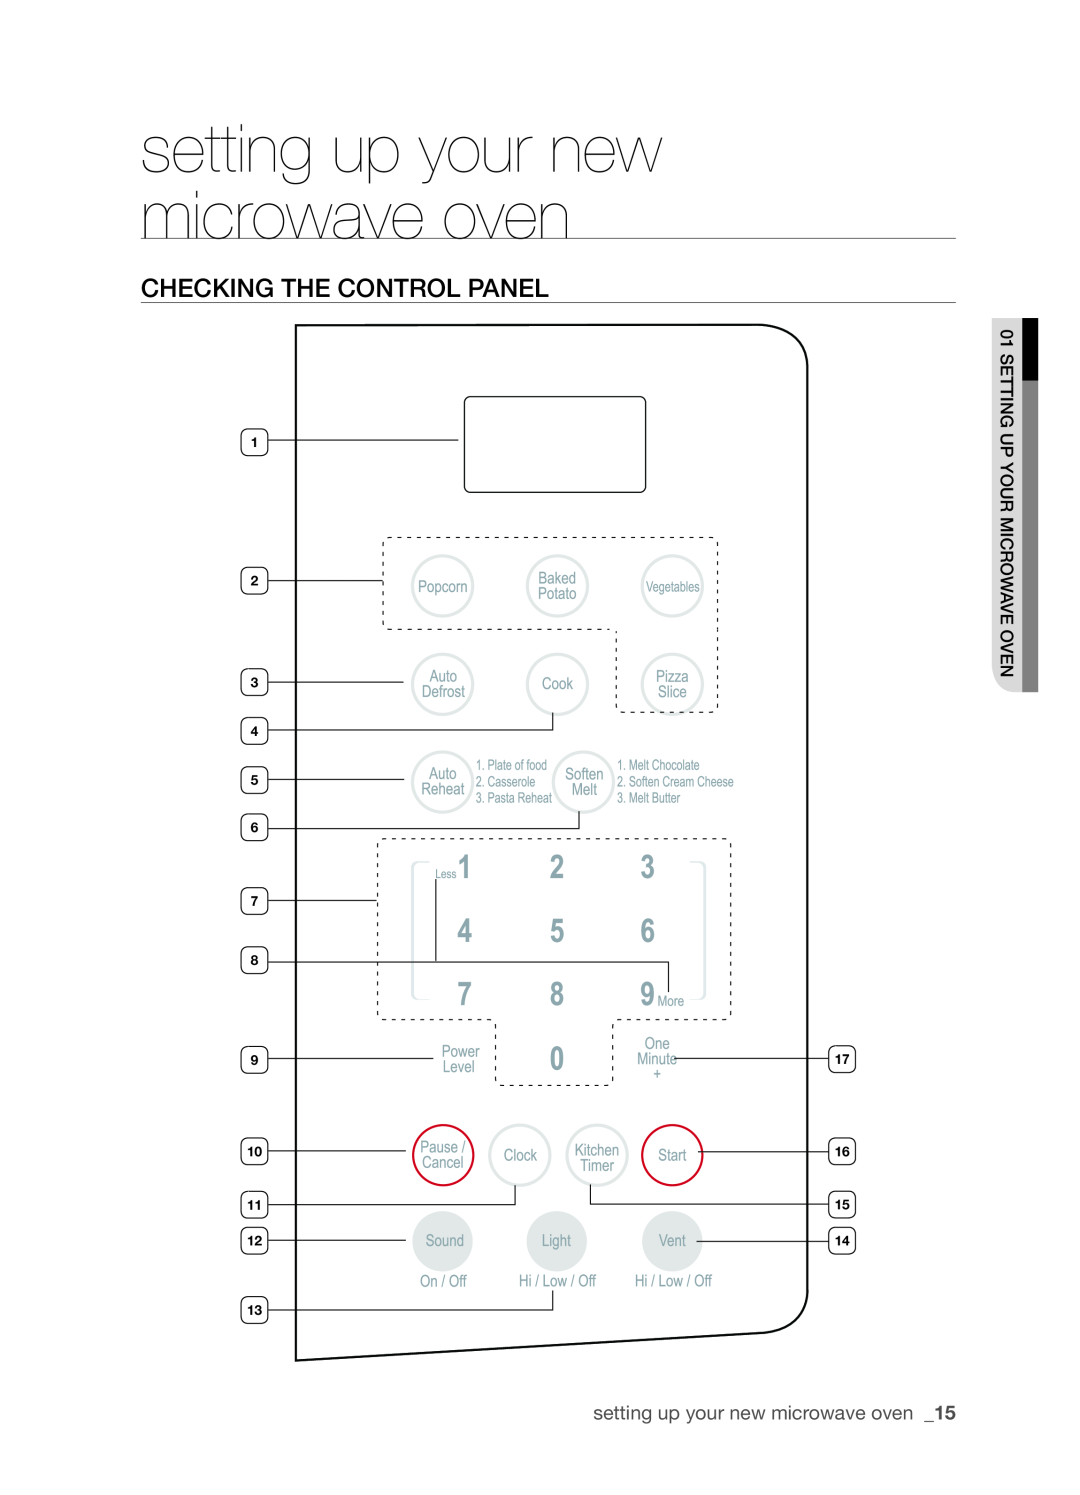 Samsung SMH9151B user manual Checking the control panel, setting up your new microwave oven 